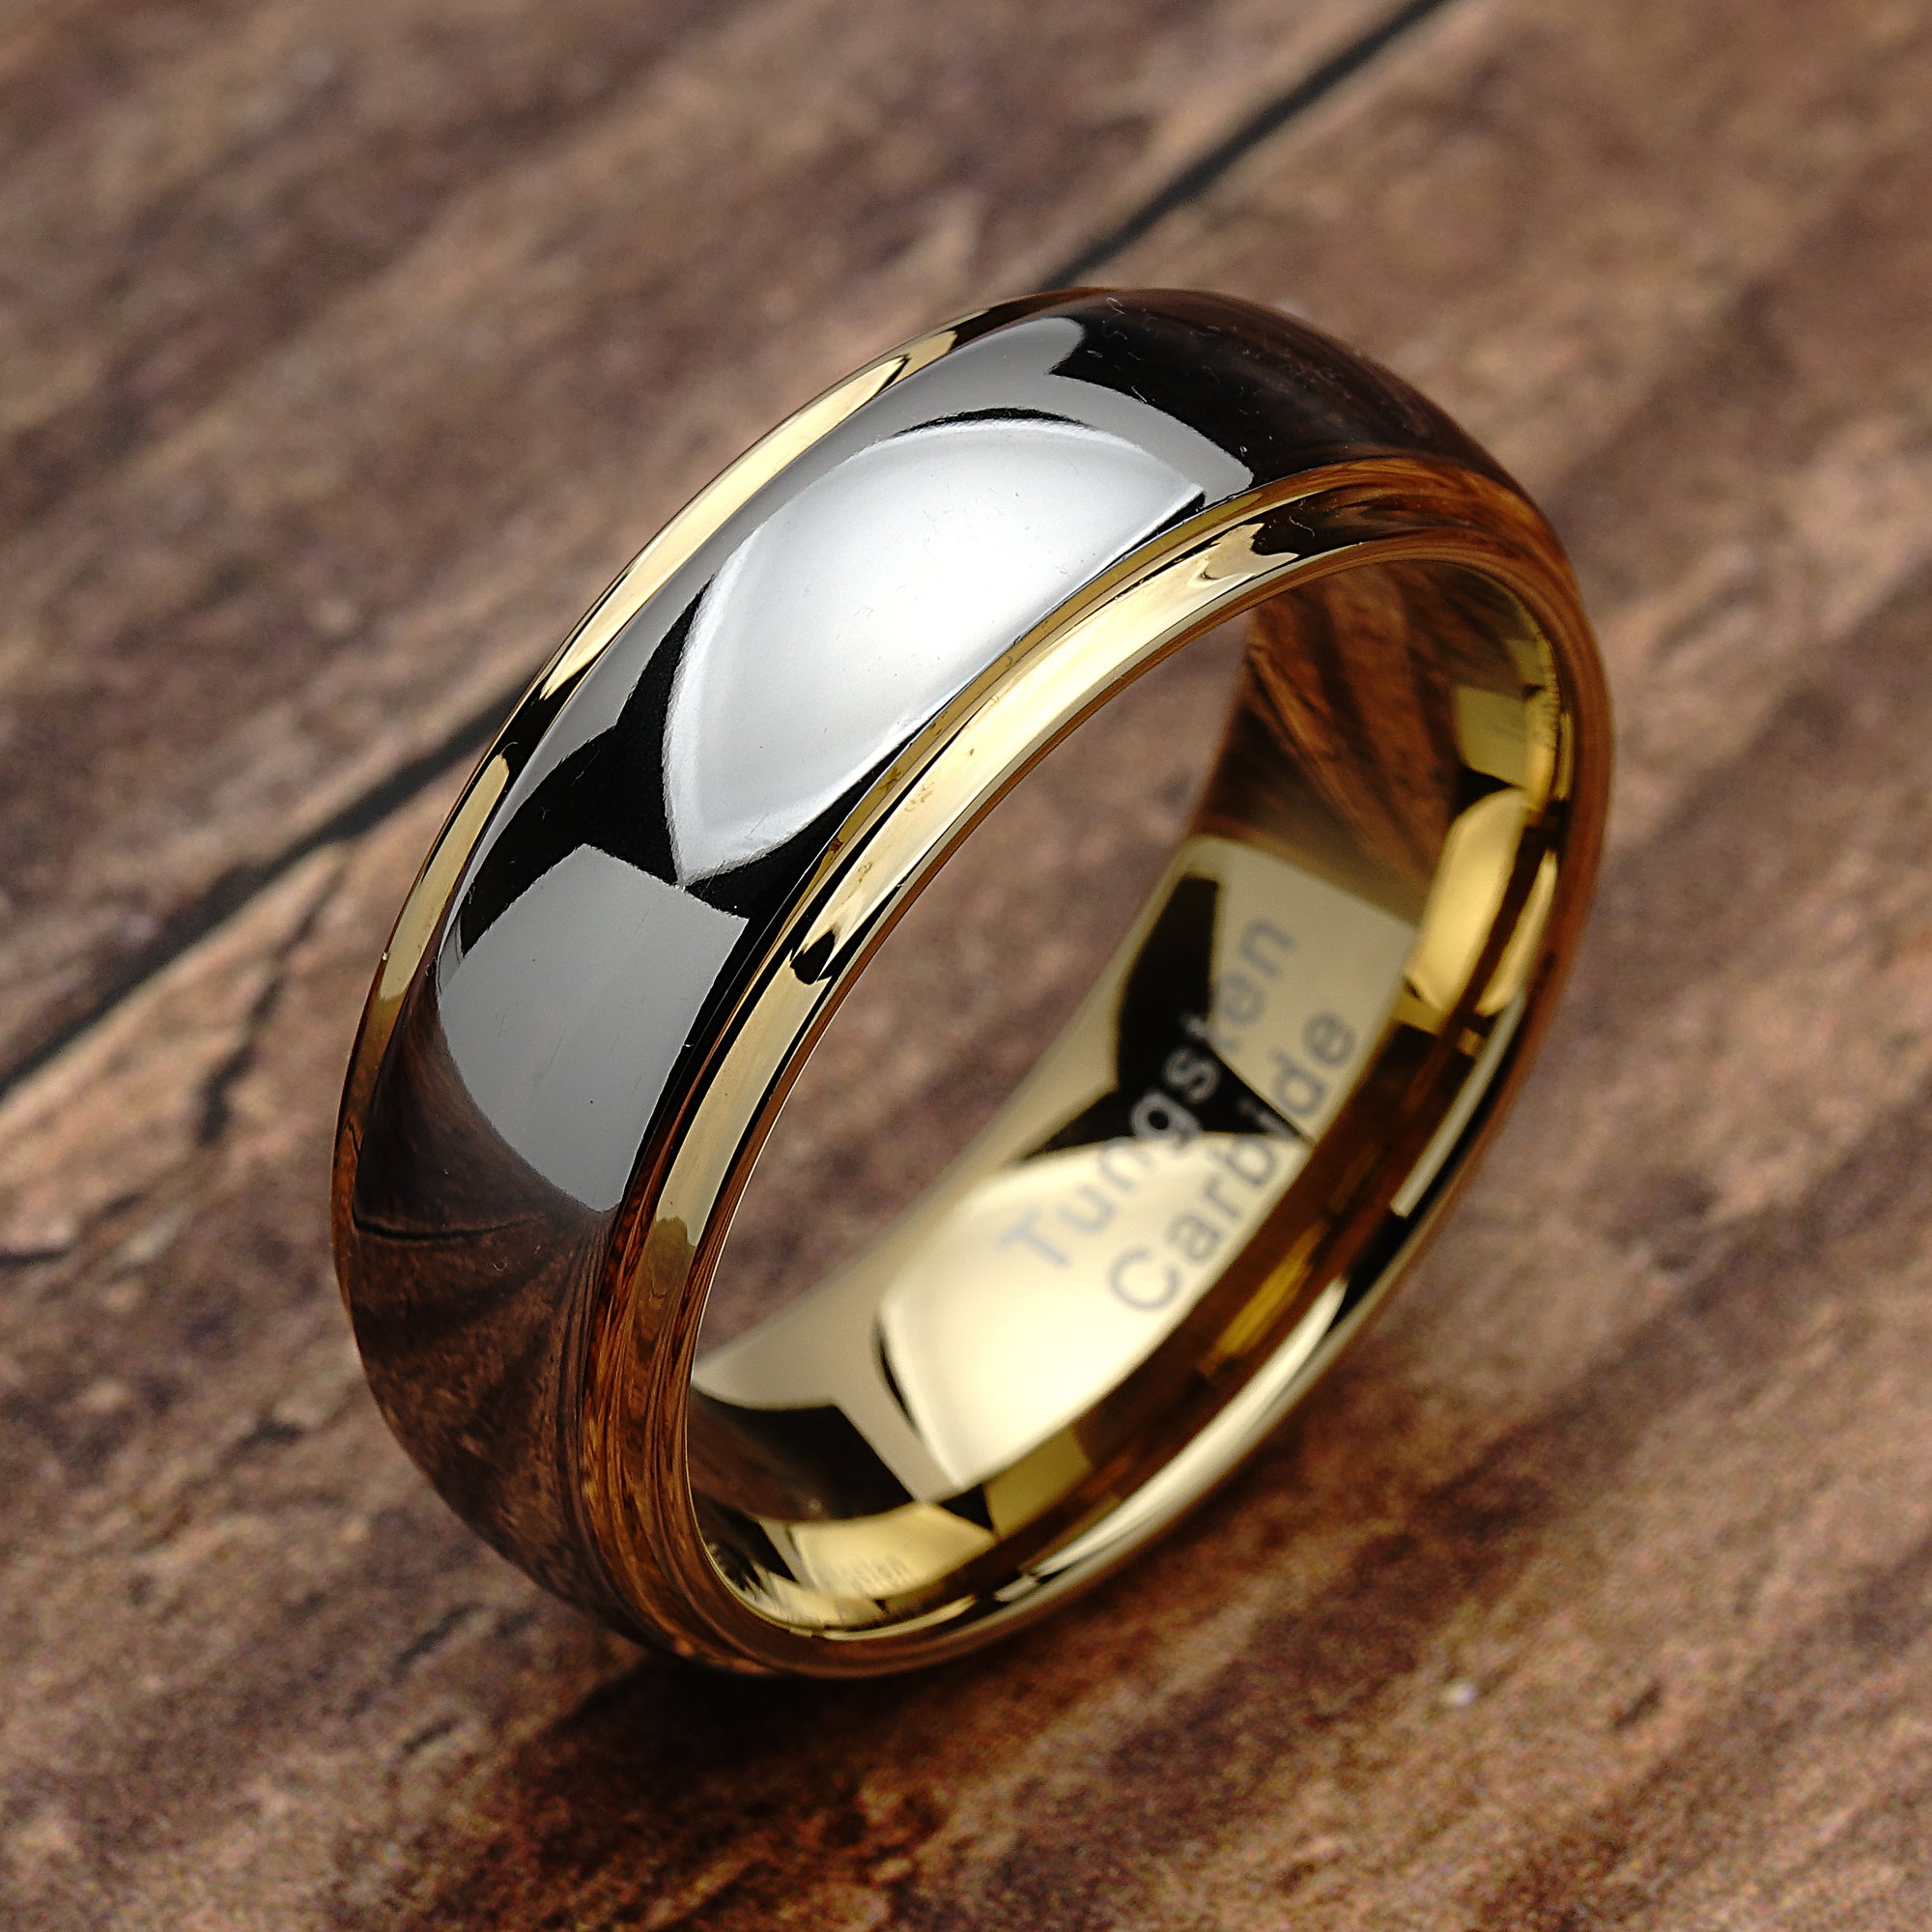 100s Jewelry Tungsten Rings for Men Women Wedding Band Two Tones Gold Silver Engagement Sizes 6-16, 15 - 100s Jewelry